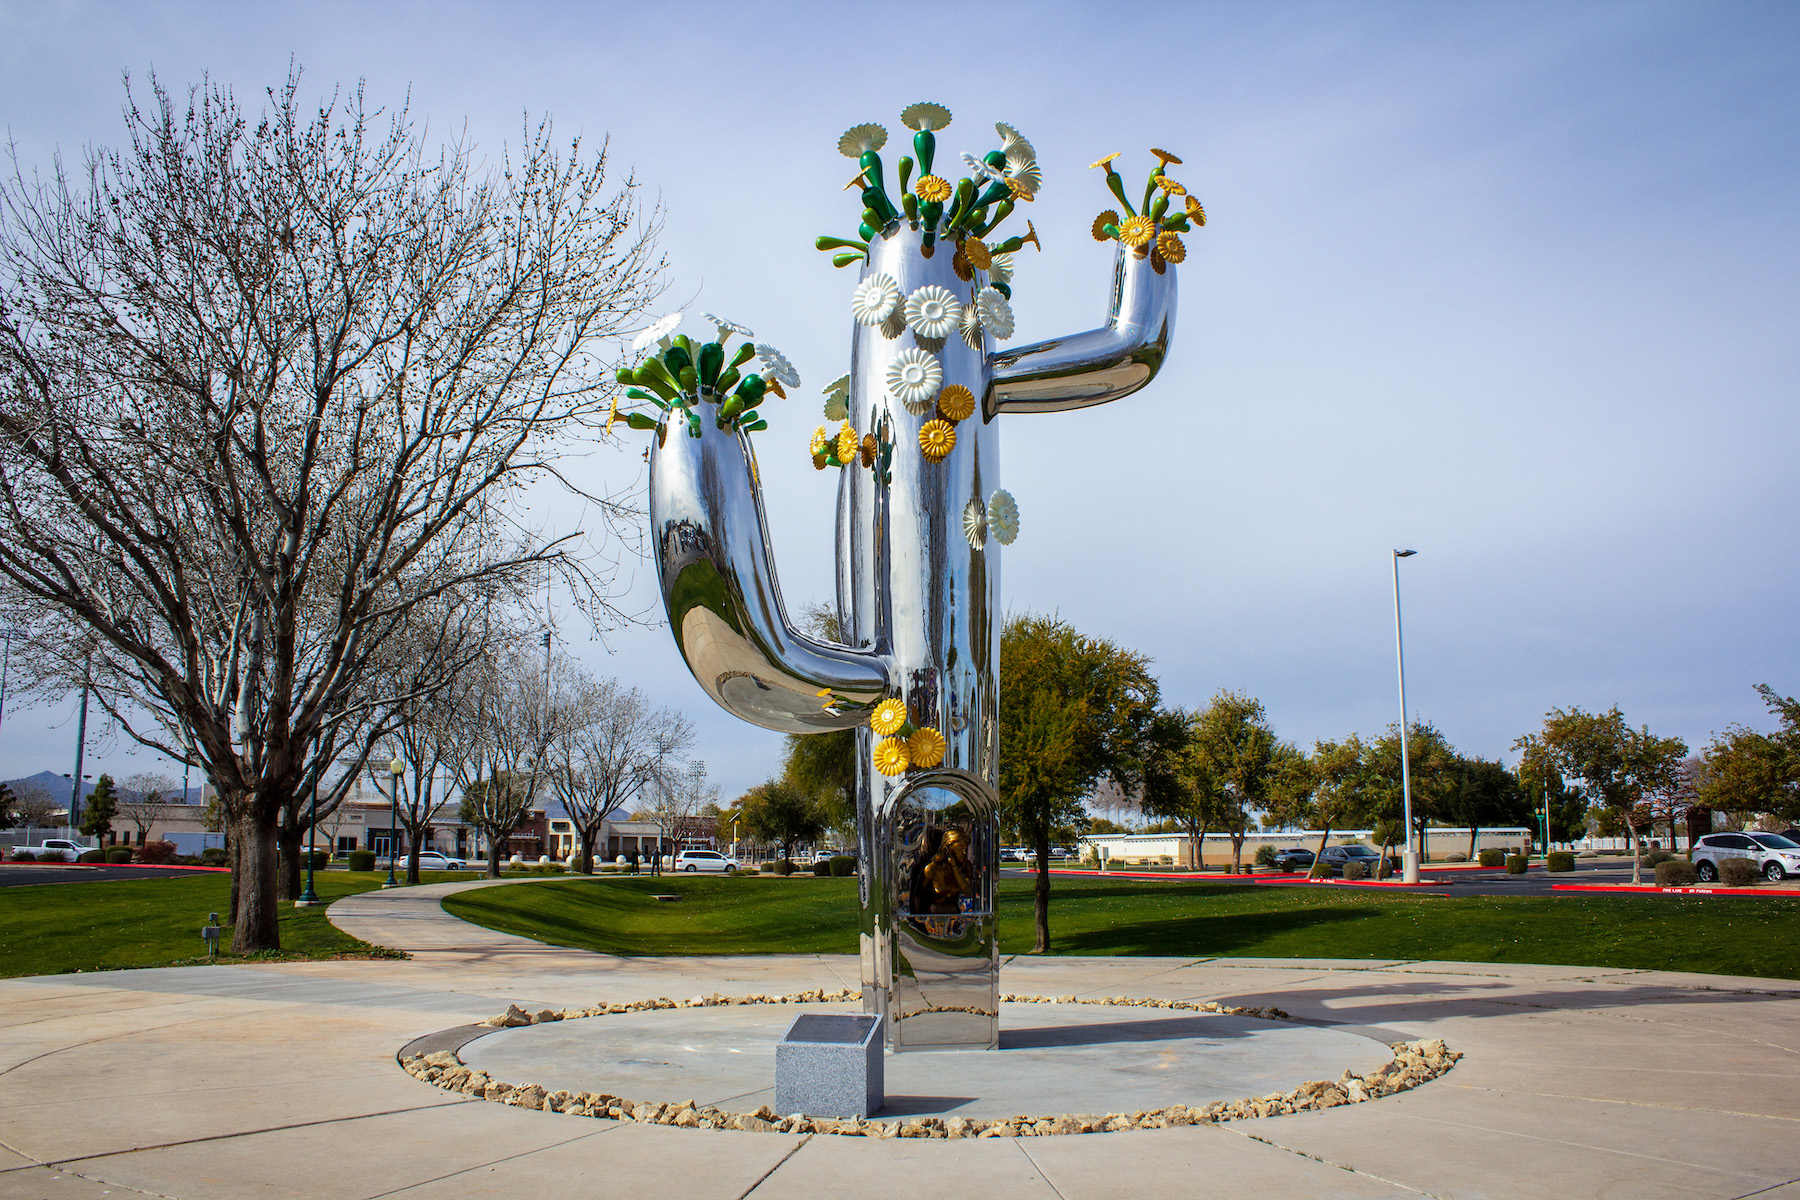 A large metal sculpture of a cactus with flowers growing out of it placed outside a school.